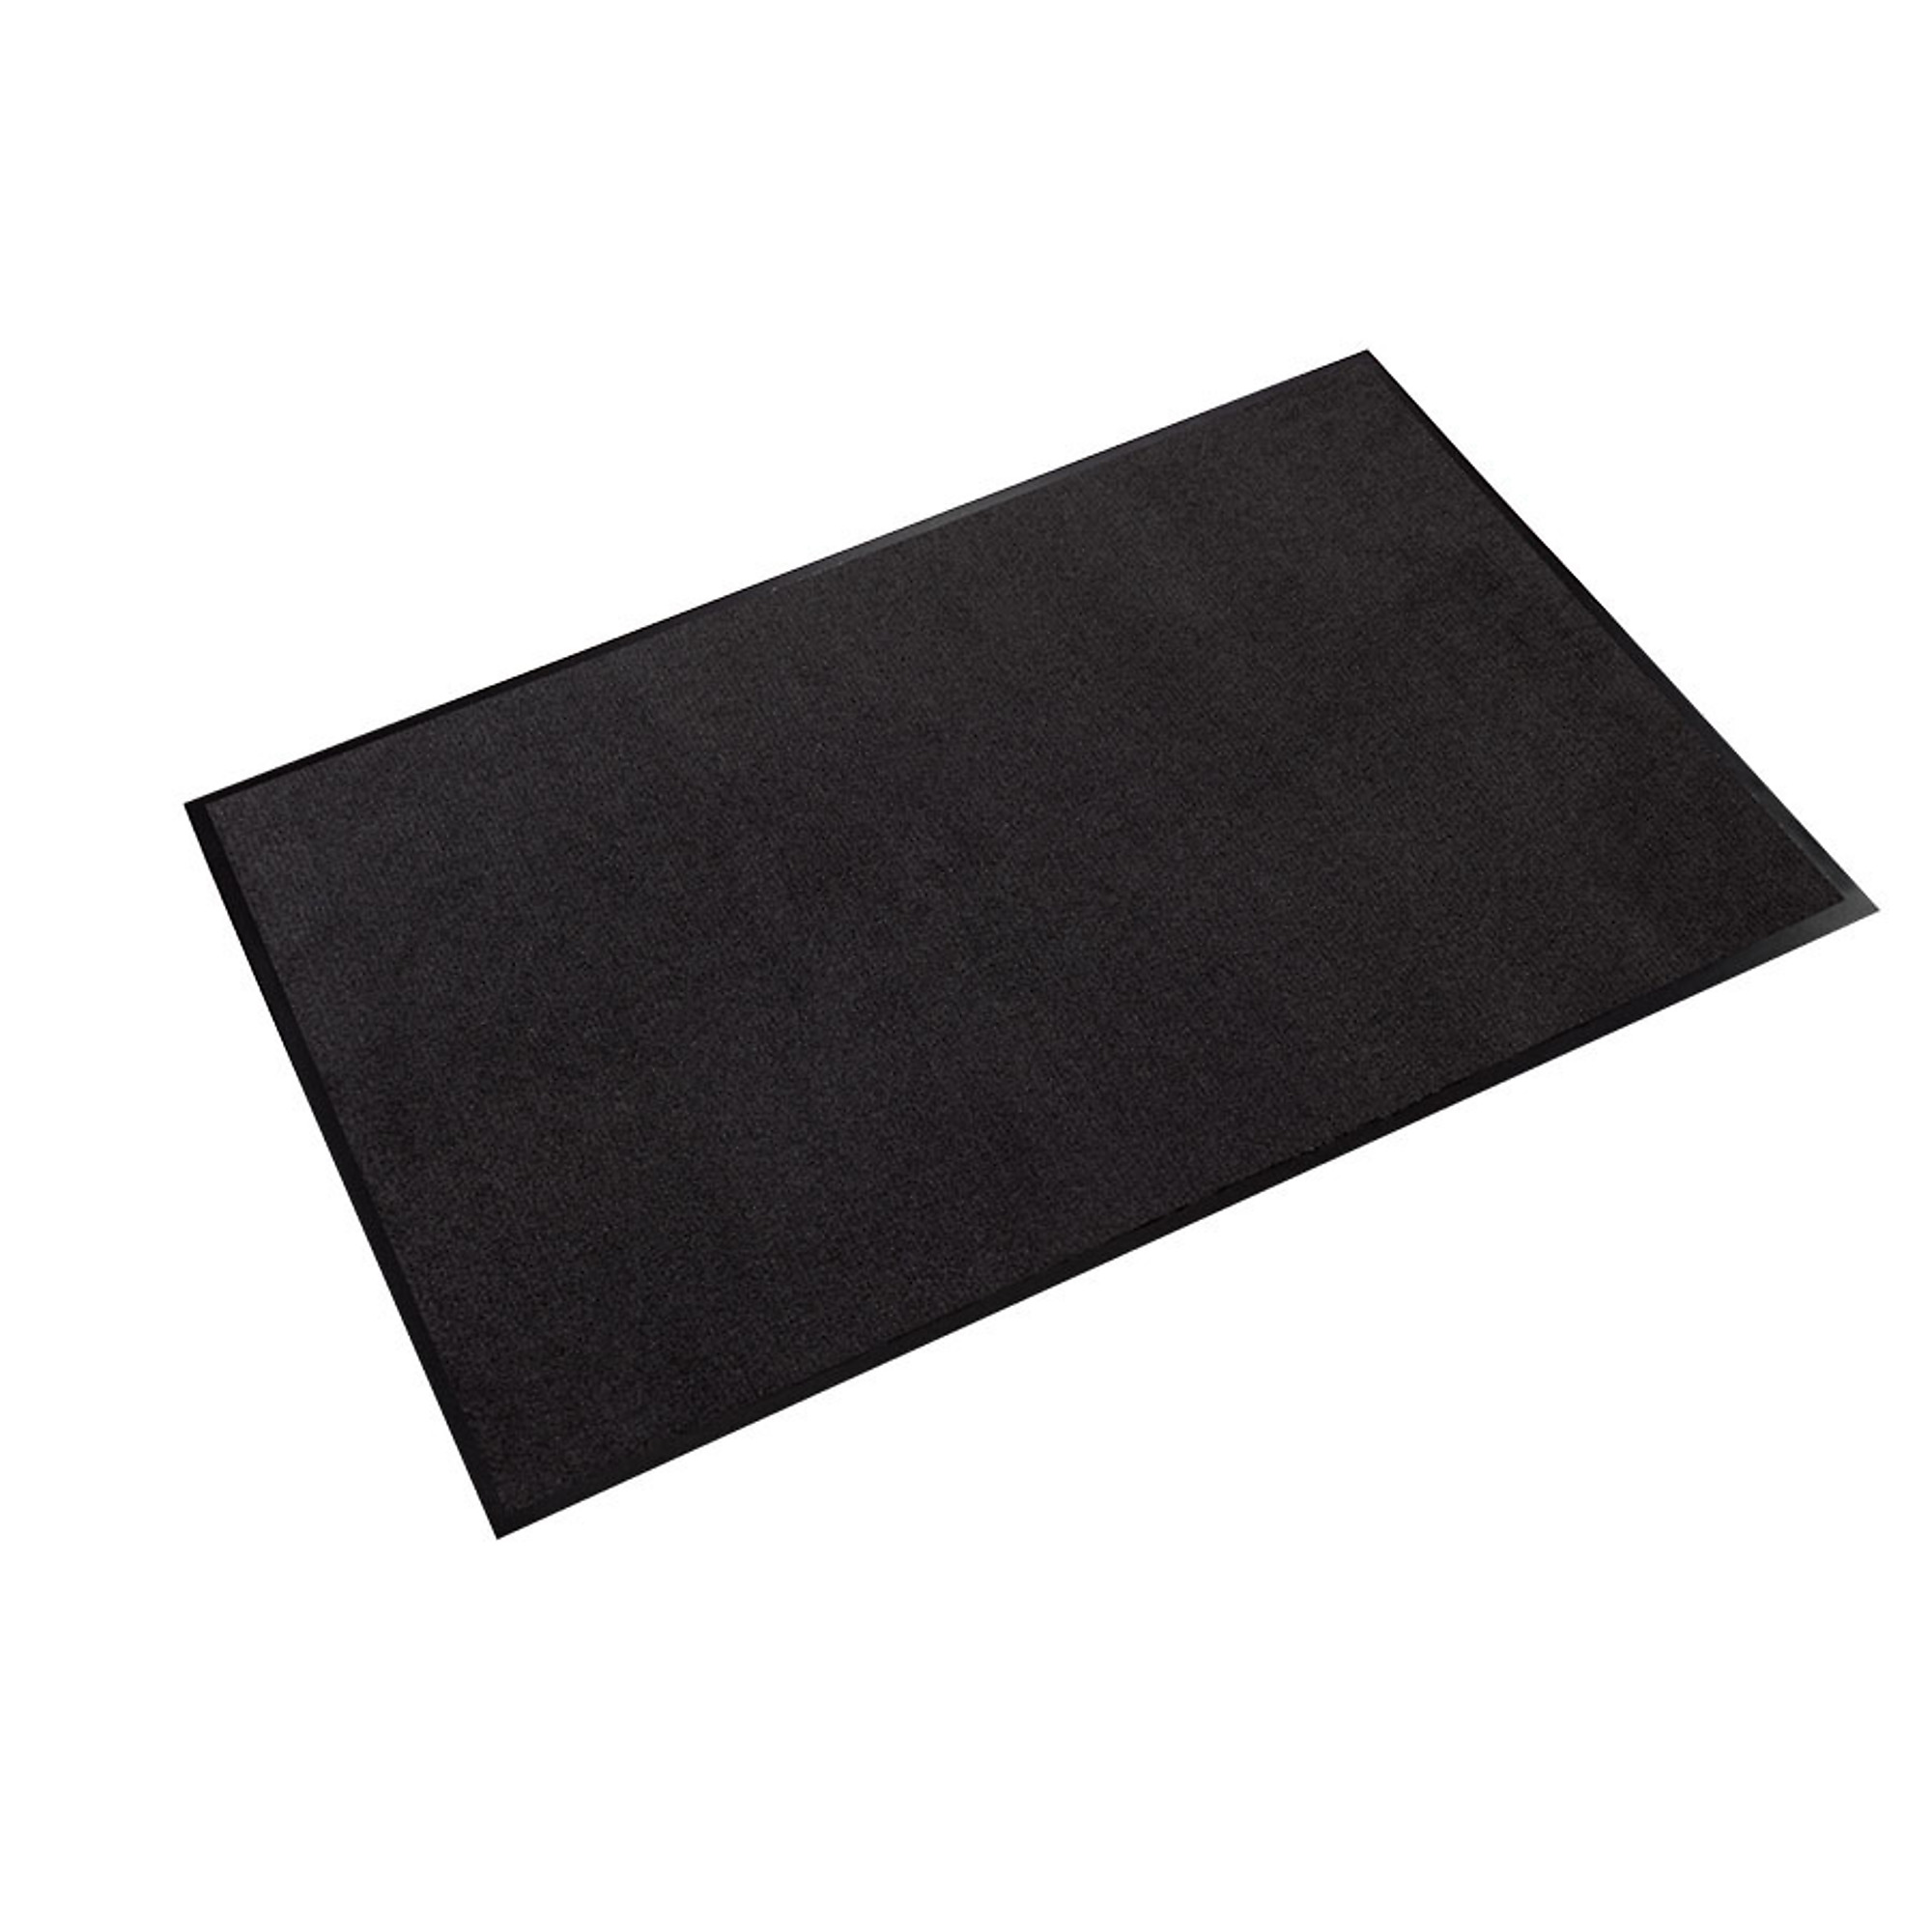 Crown Matting Technologies, Rely-On Olefin 3ft.x10ft. Black, Width 36 in, Length 120 in, Thickness 3/8 in, Model GS 0310BK